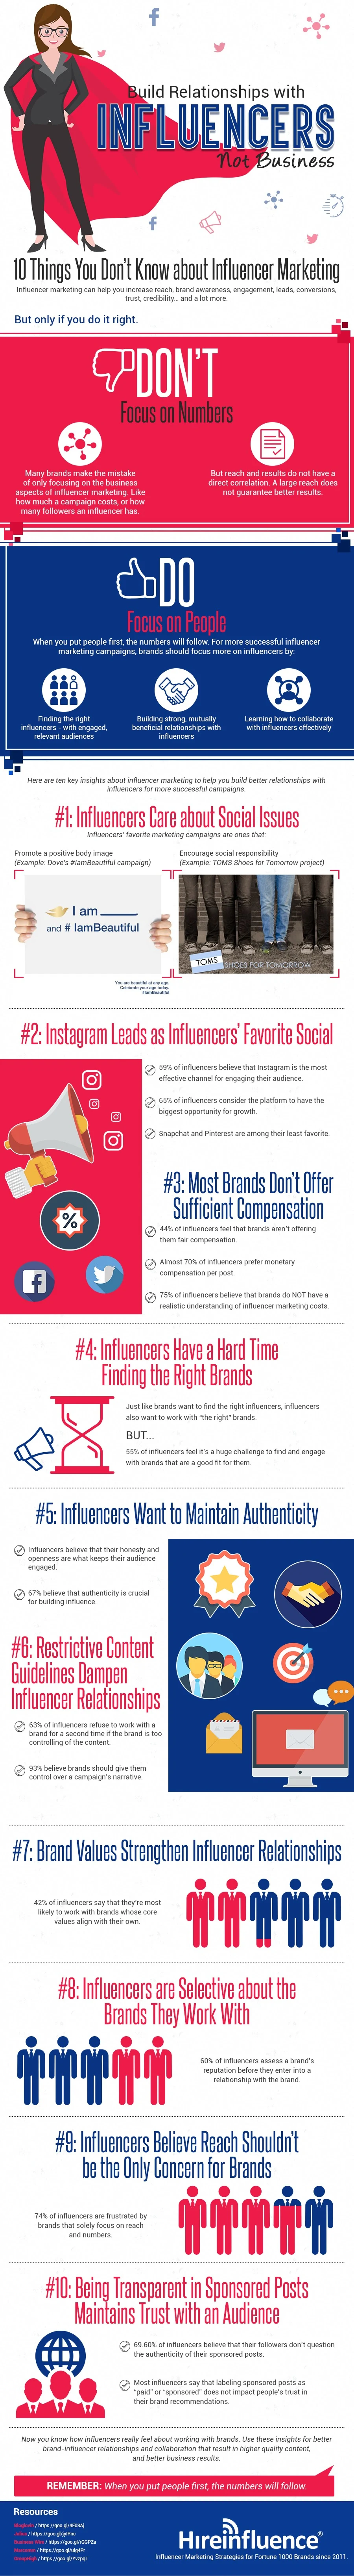 The Do's and Don'ts of Influencer Marketing - infographic